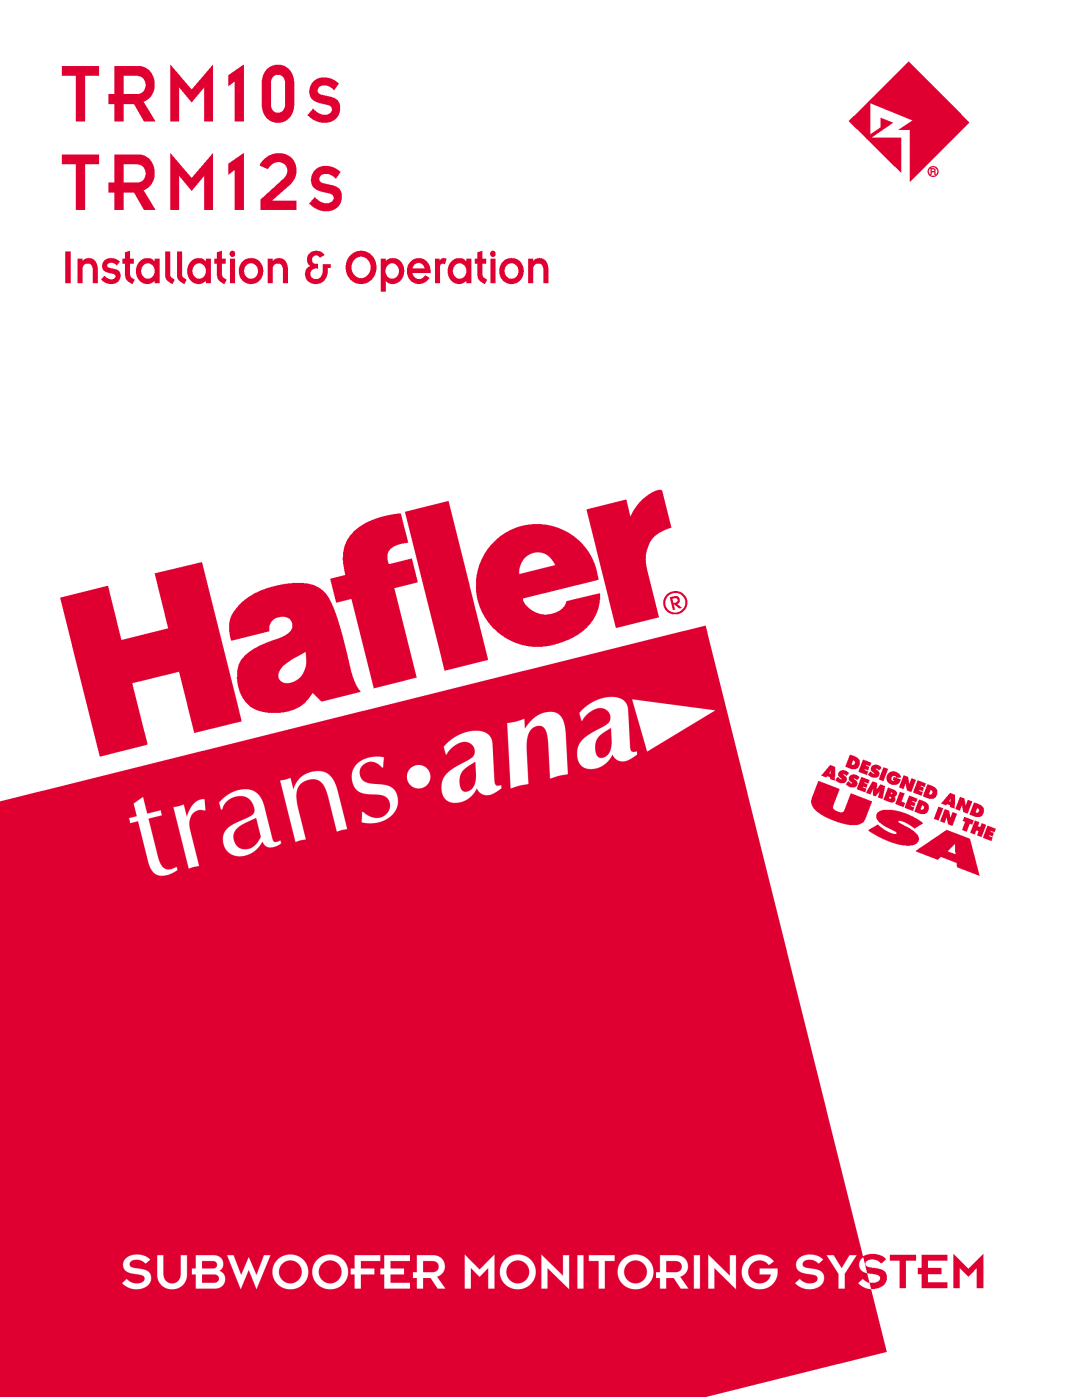 Hafler TRM10S manual TRM10s TRM12s, Subwoofer Monitoring System, Installation & Operation, Assembleddesigned Usaand In The 